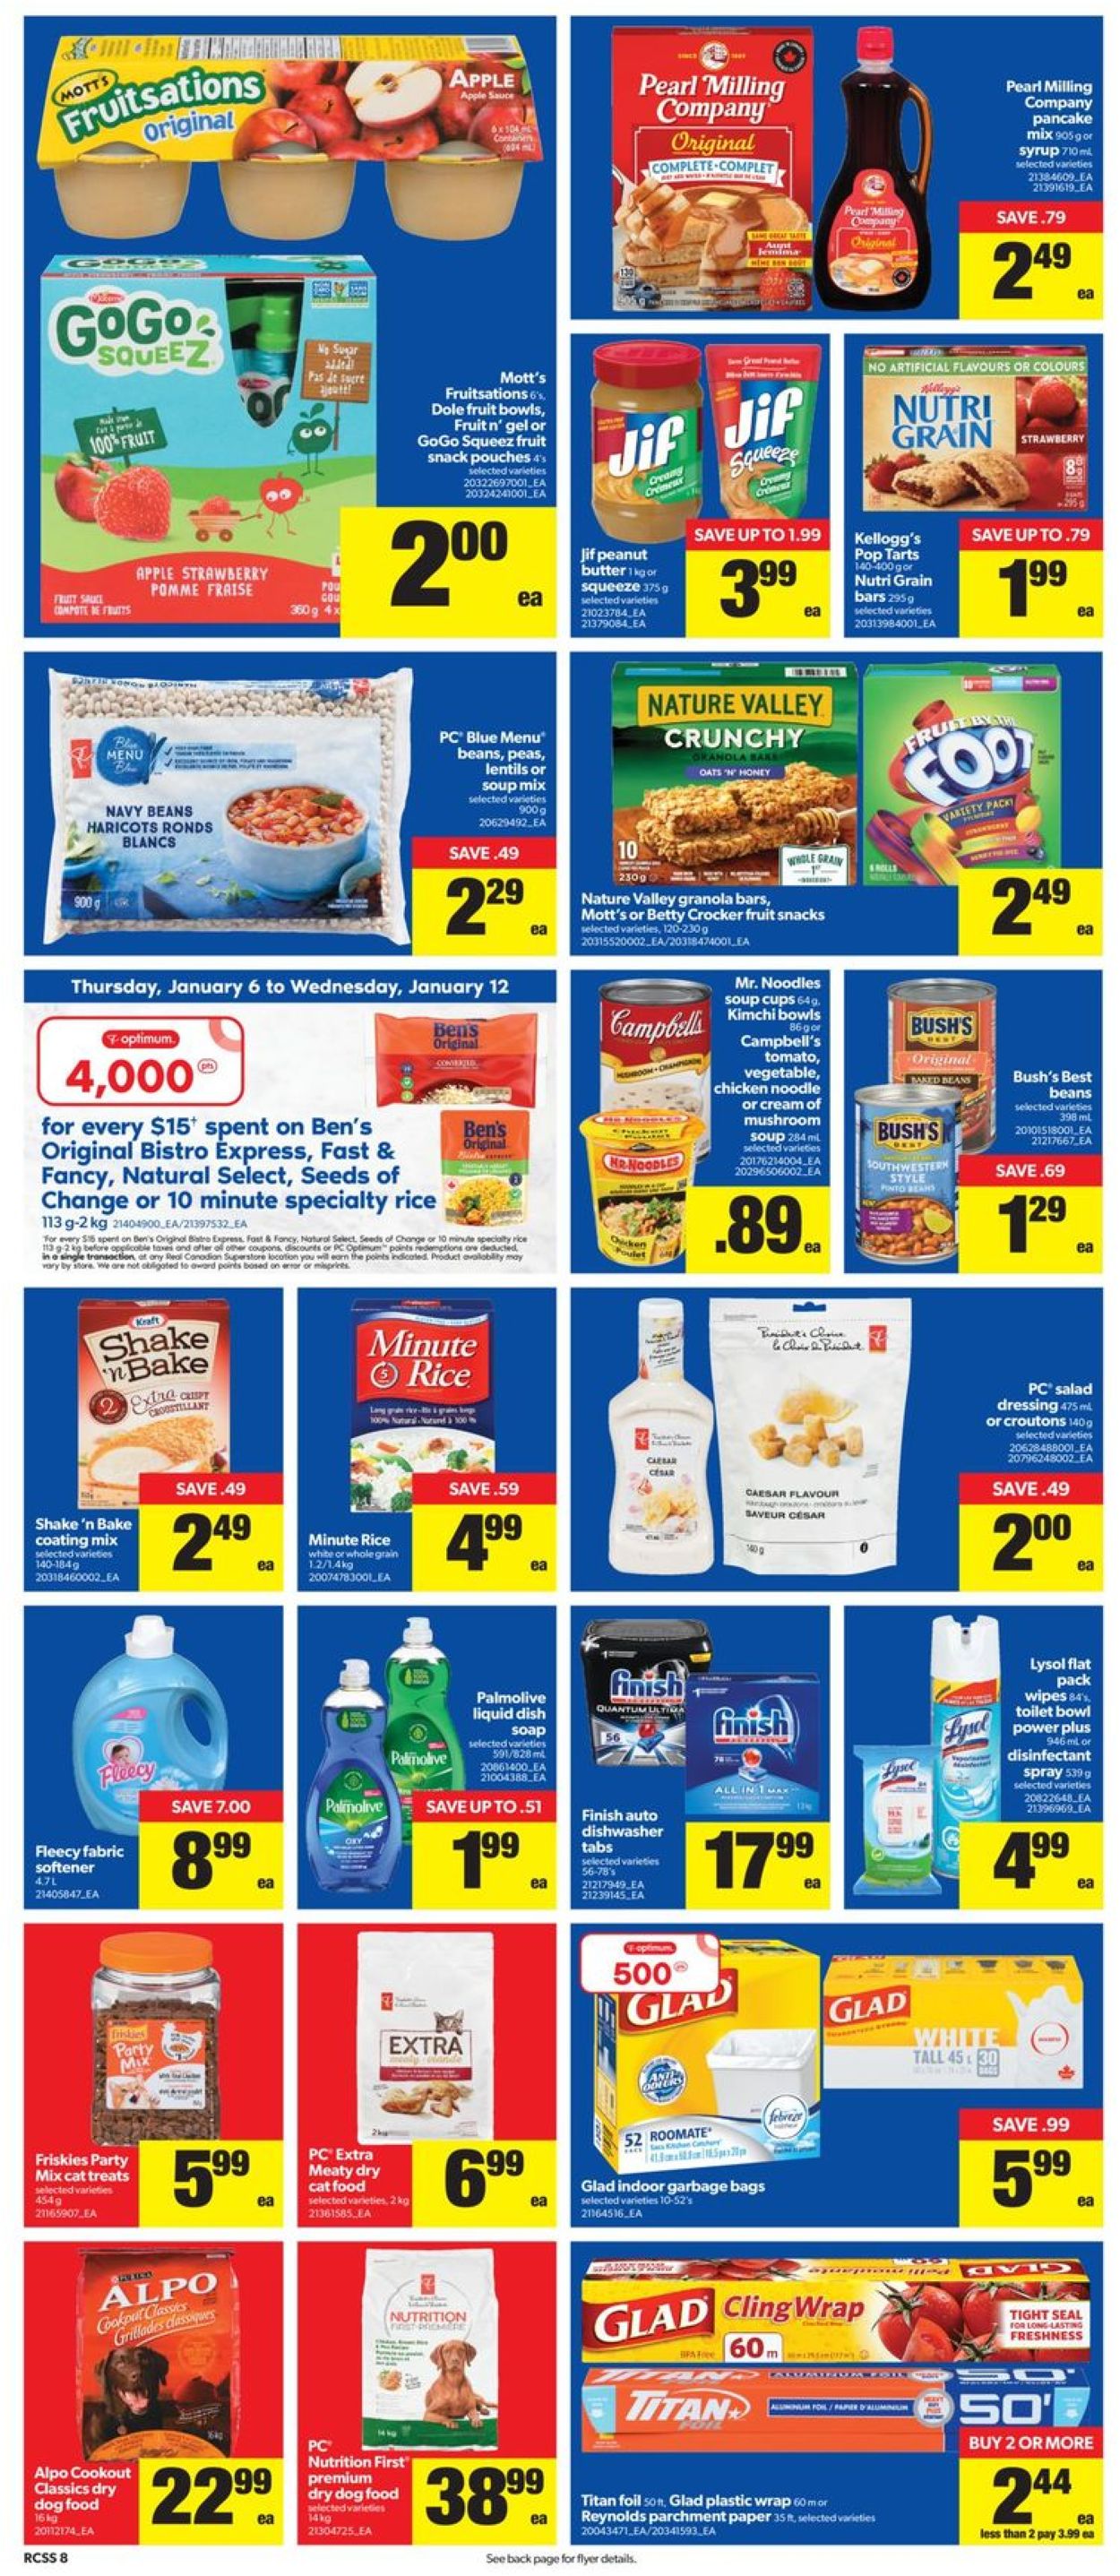 Real Canadian Superstore Flyer from 01/06/2022